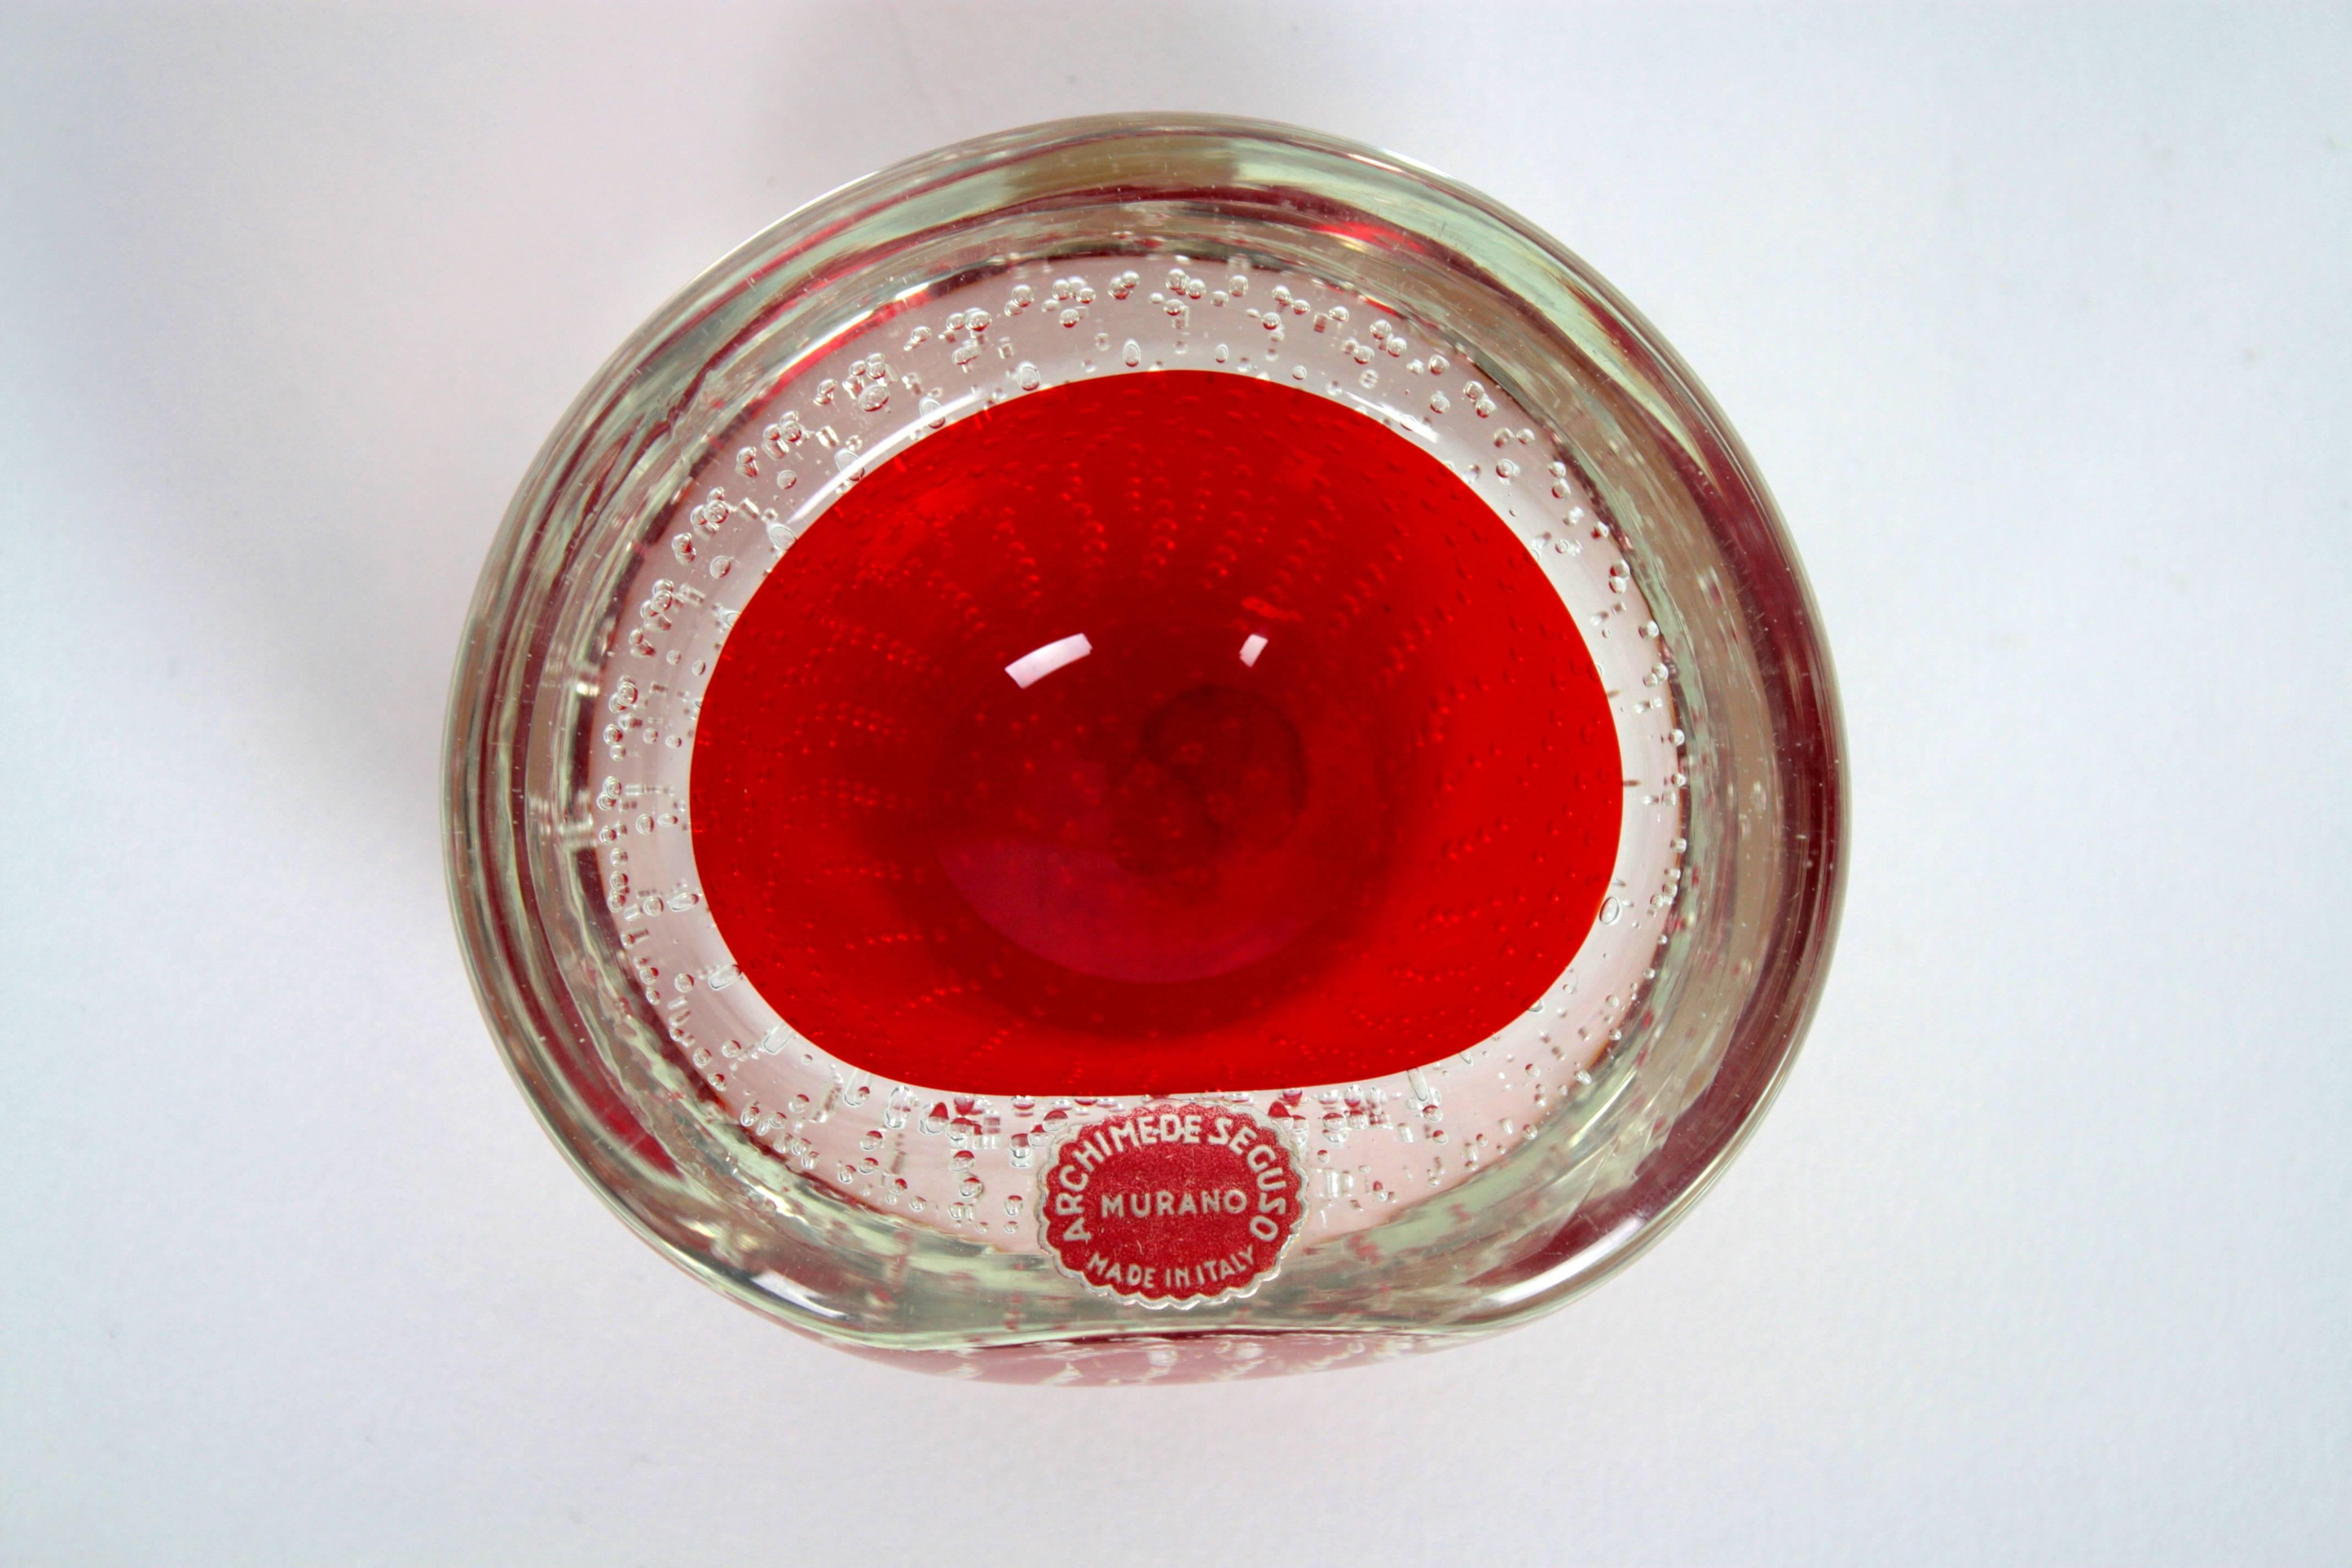 Amazing geode Murano handblown art glass bowl. Vibrant red glass cased into clear glass with controlled bubbles. Highly decorative, useful as jewelry bowl, Archimede Seguso, 1950s-1960s.

This bowl is in excellent condition. It wears the two